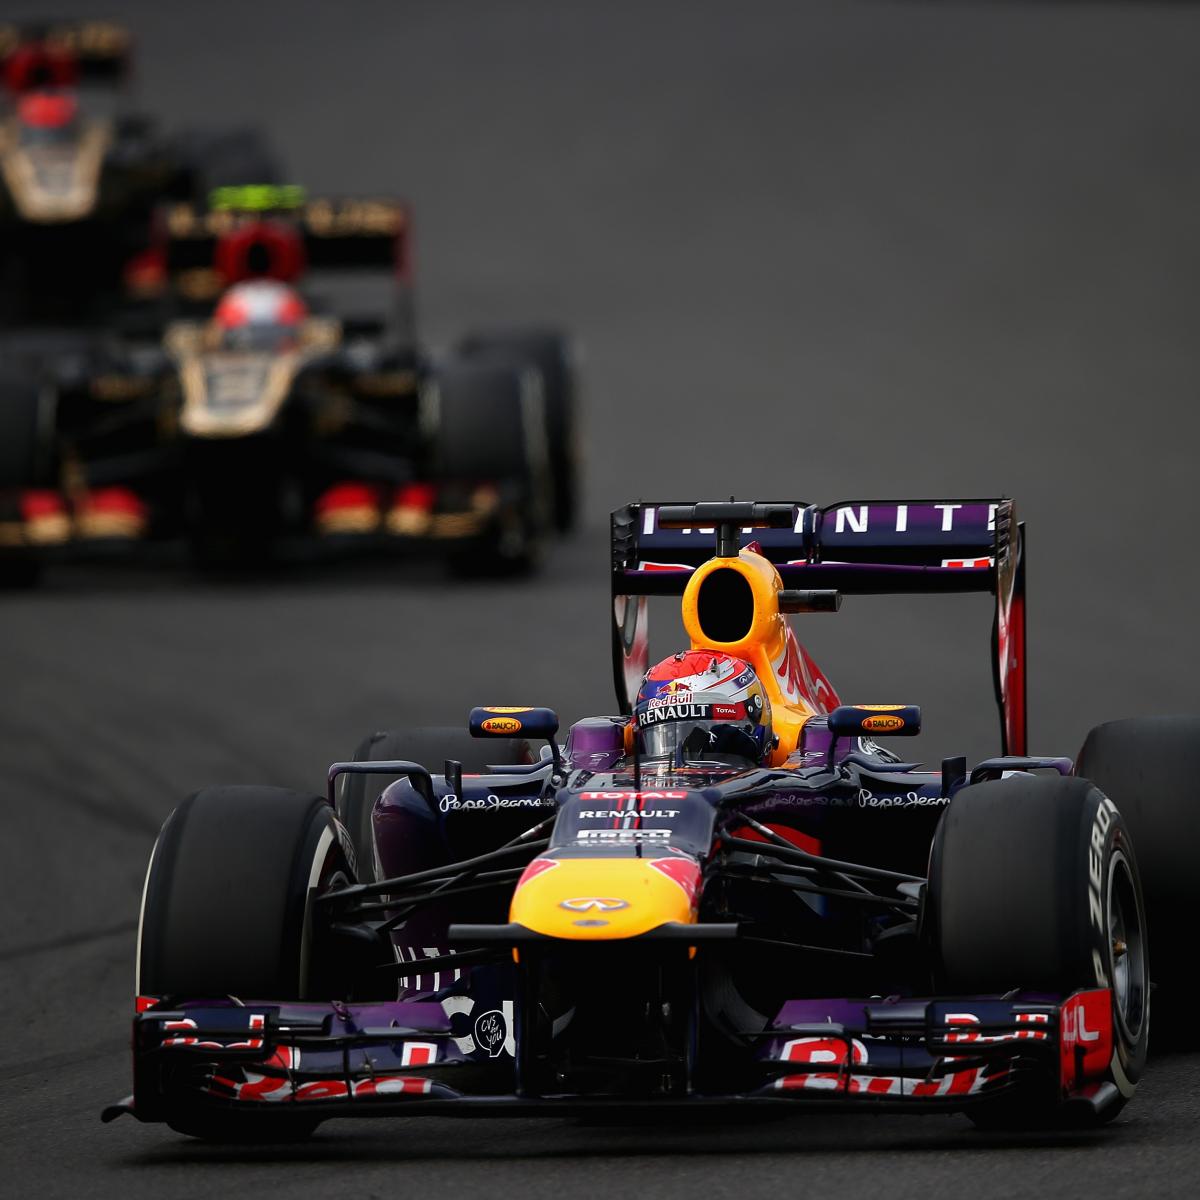 Red Bull and Lotus Got the Most Value for Their Money in the 2013 F1